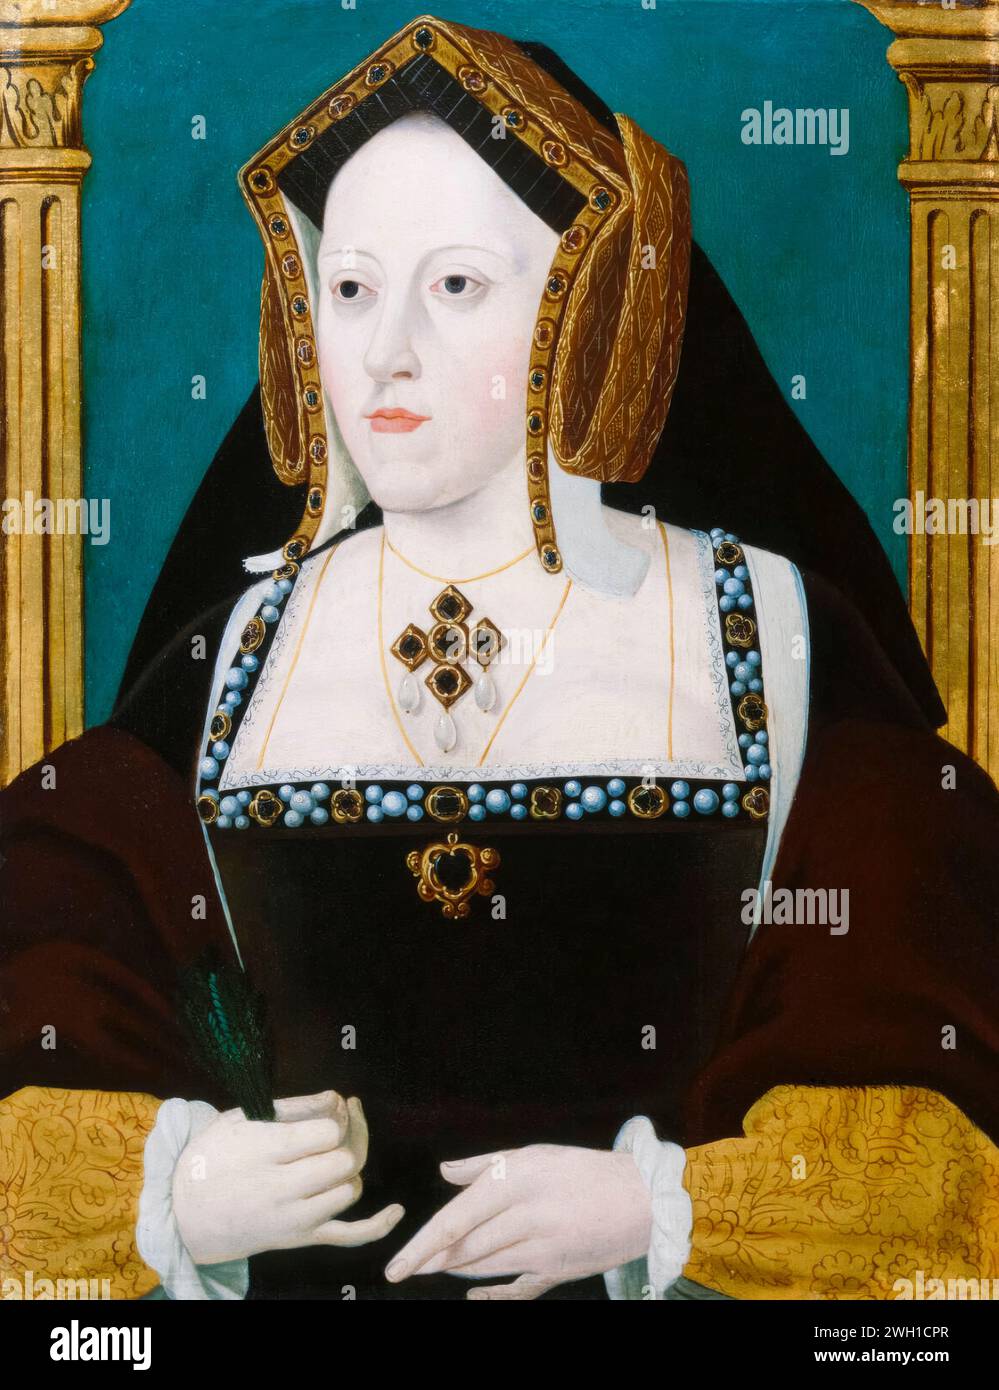 Catherine of Aragon or Katherine of Aragon (1485-1536), Queen of England (1509-1533), portrait painting in oil on panel, 1700-1725 Stock Photo